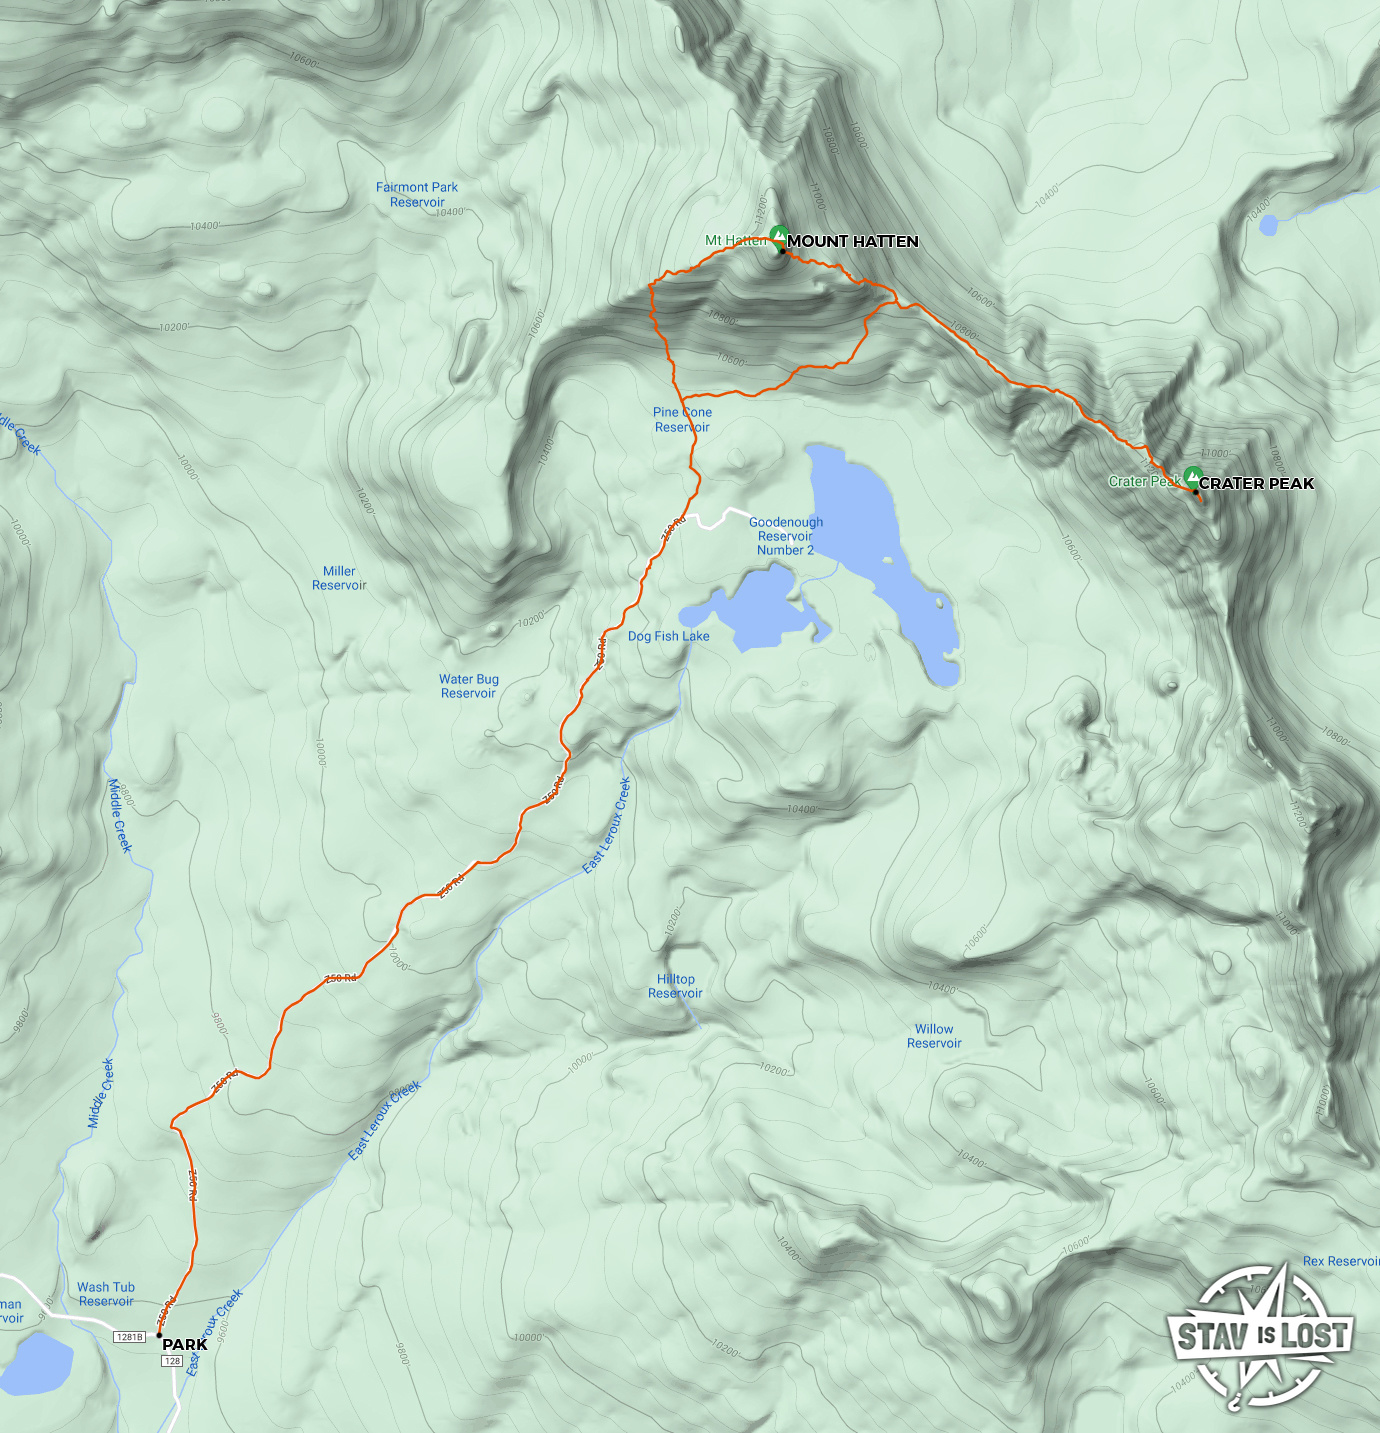 map for Mount Hatten and Crater Peak by stav is lost